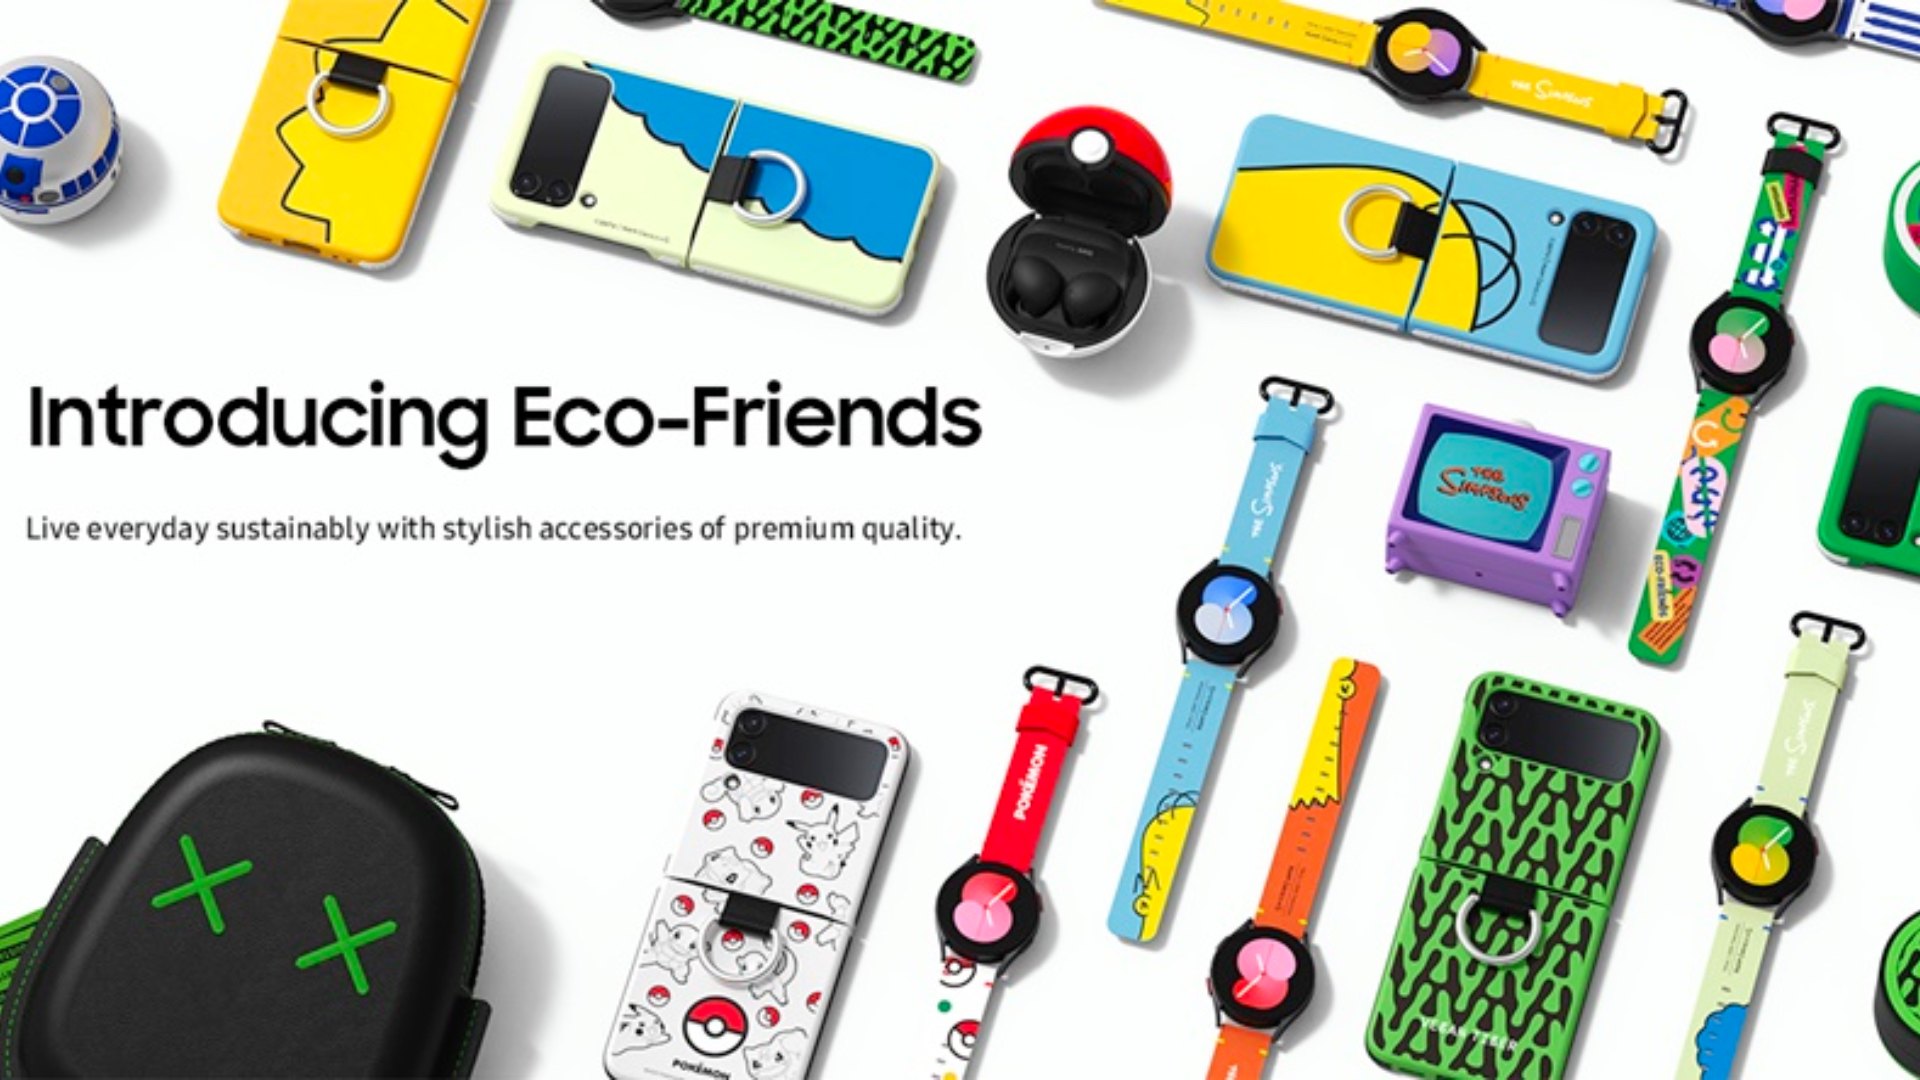 Samsung unveils eco-friendly accessories for Galaxy phones and Korea - SamMobile